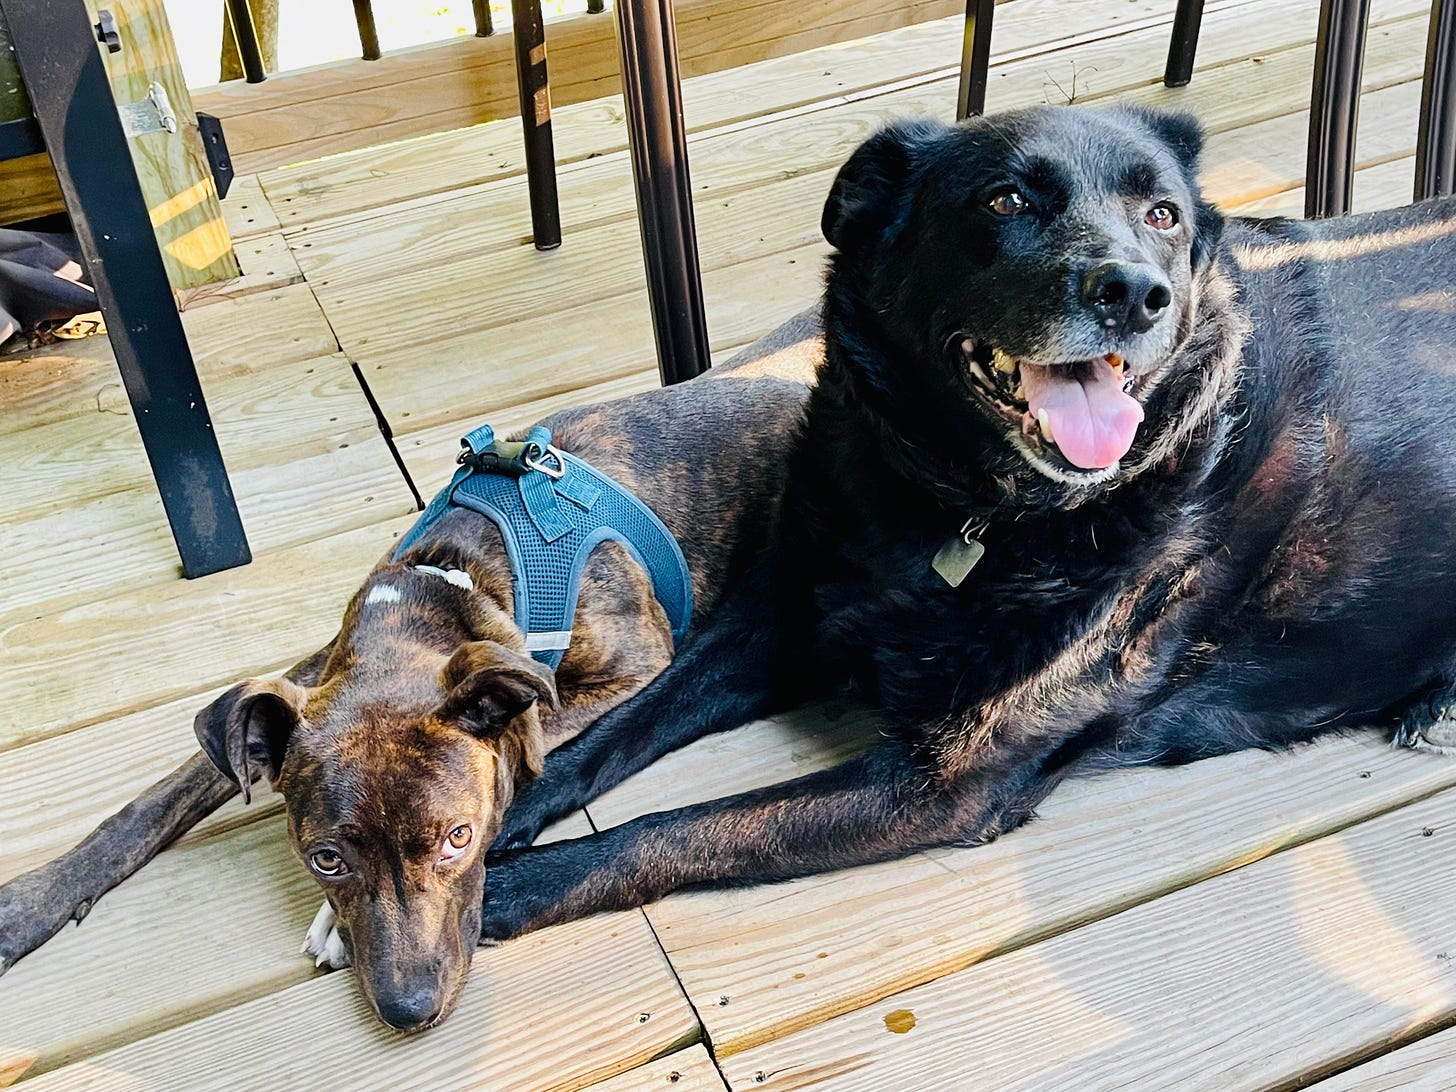 Two dogs on a deck. One dog has her head resting on the other smiling dog's front paws